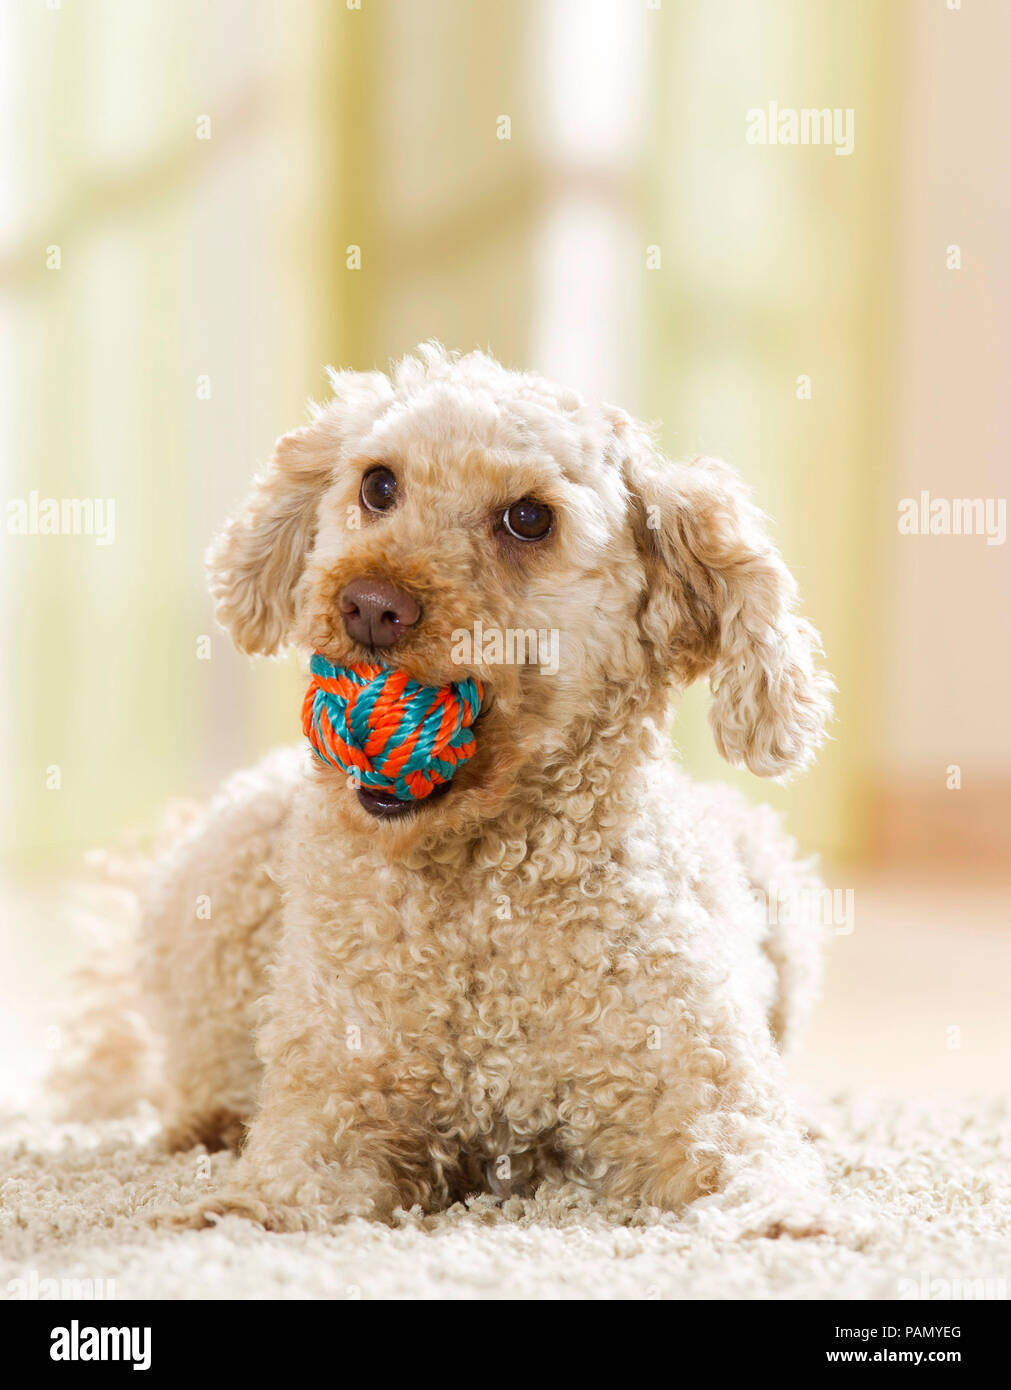 A poodle lies on carpet with a small ball in its muzzle. Germany. Stock Photo